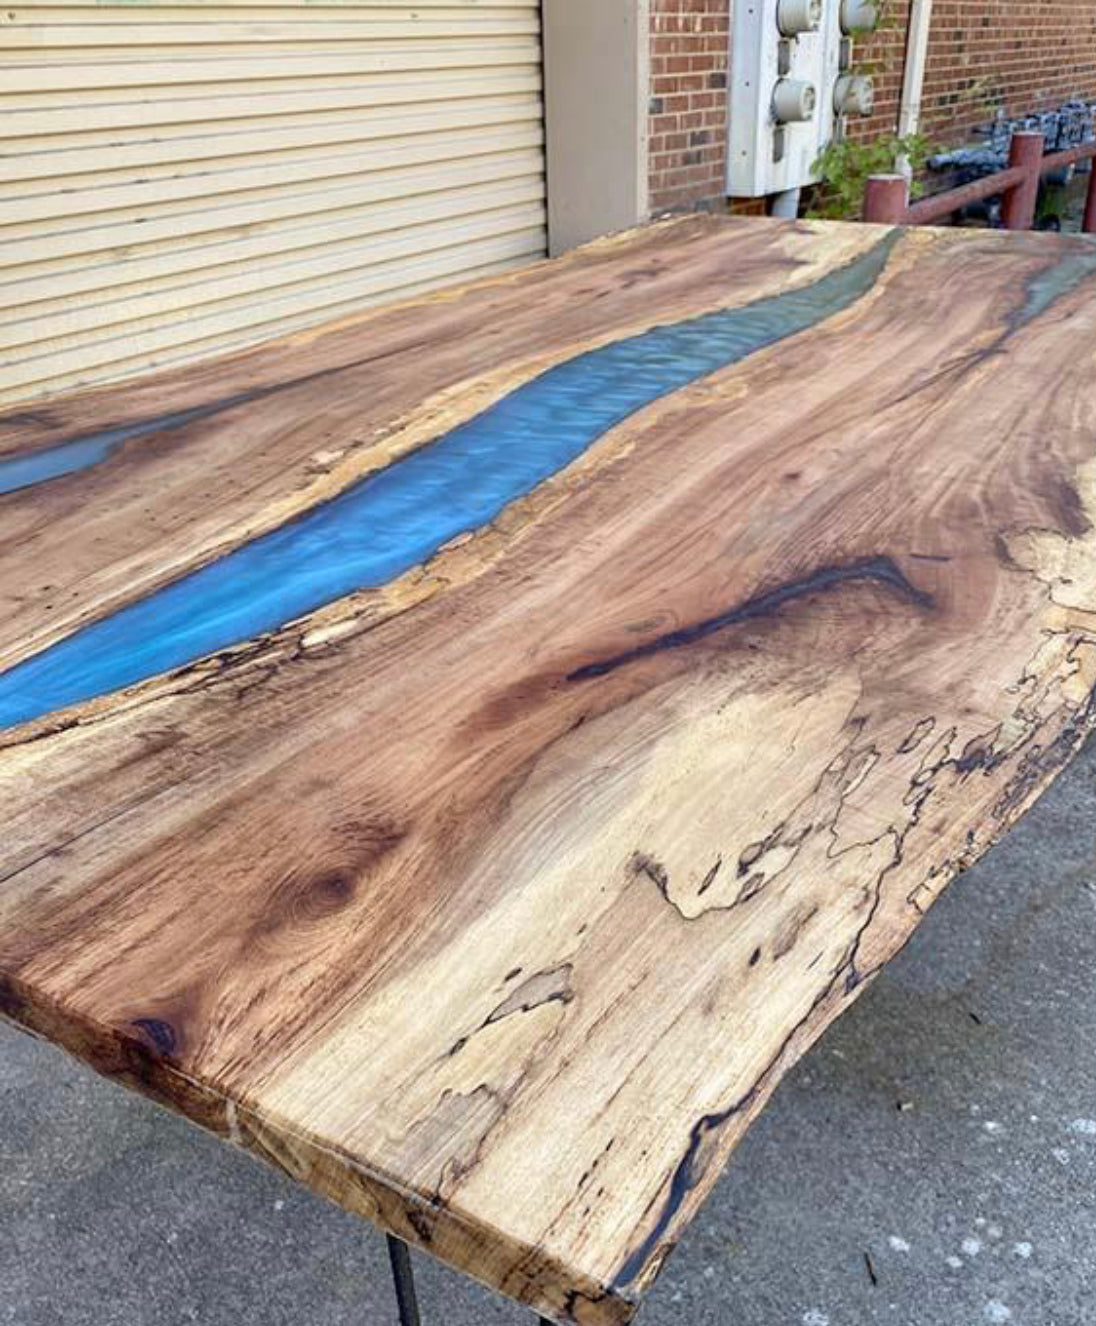 2" Thick Rough Cut Pecan Live Edge Slabs for Charcuterie Boards, Furniture, Tables and Bar Tops, Shelves, and More - Kiln Dried